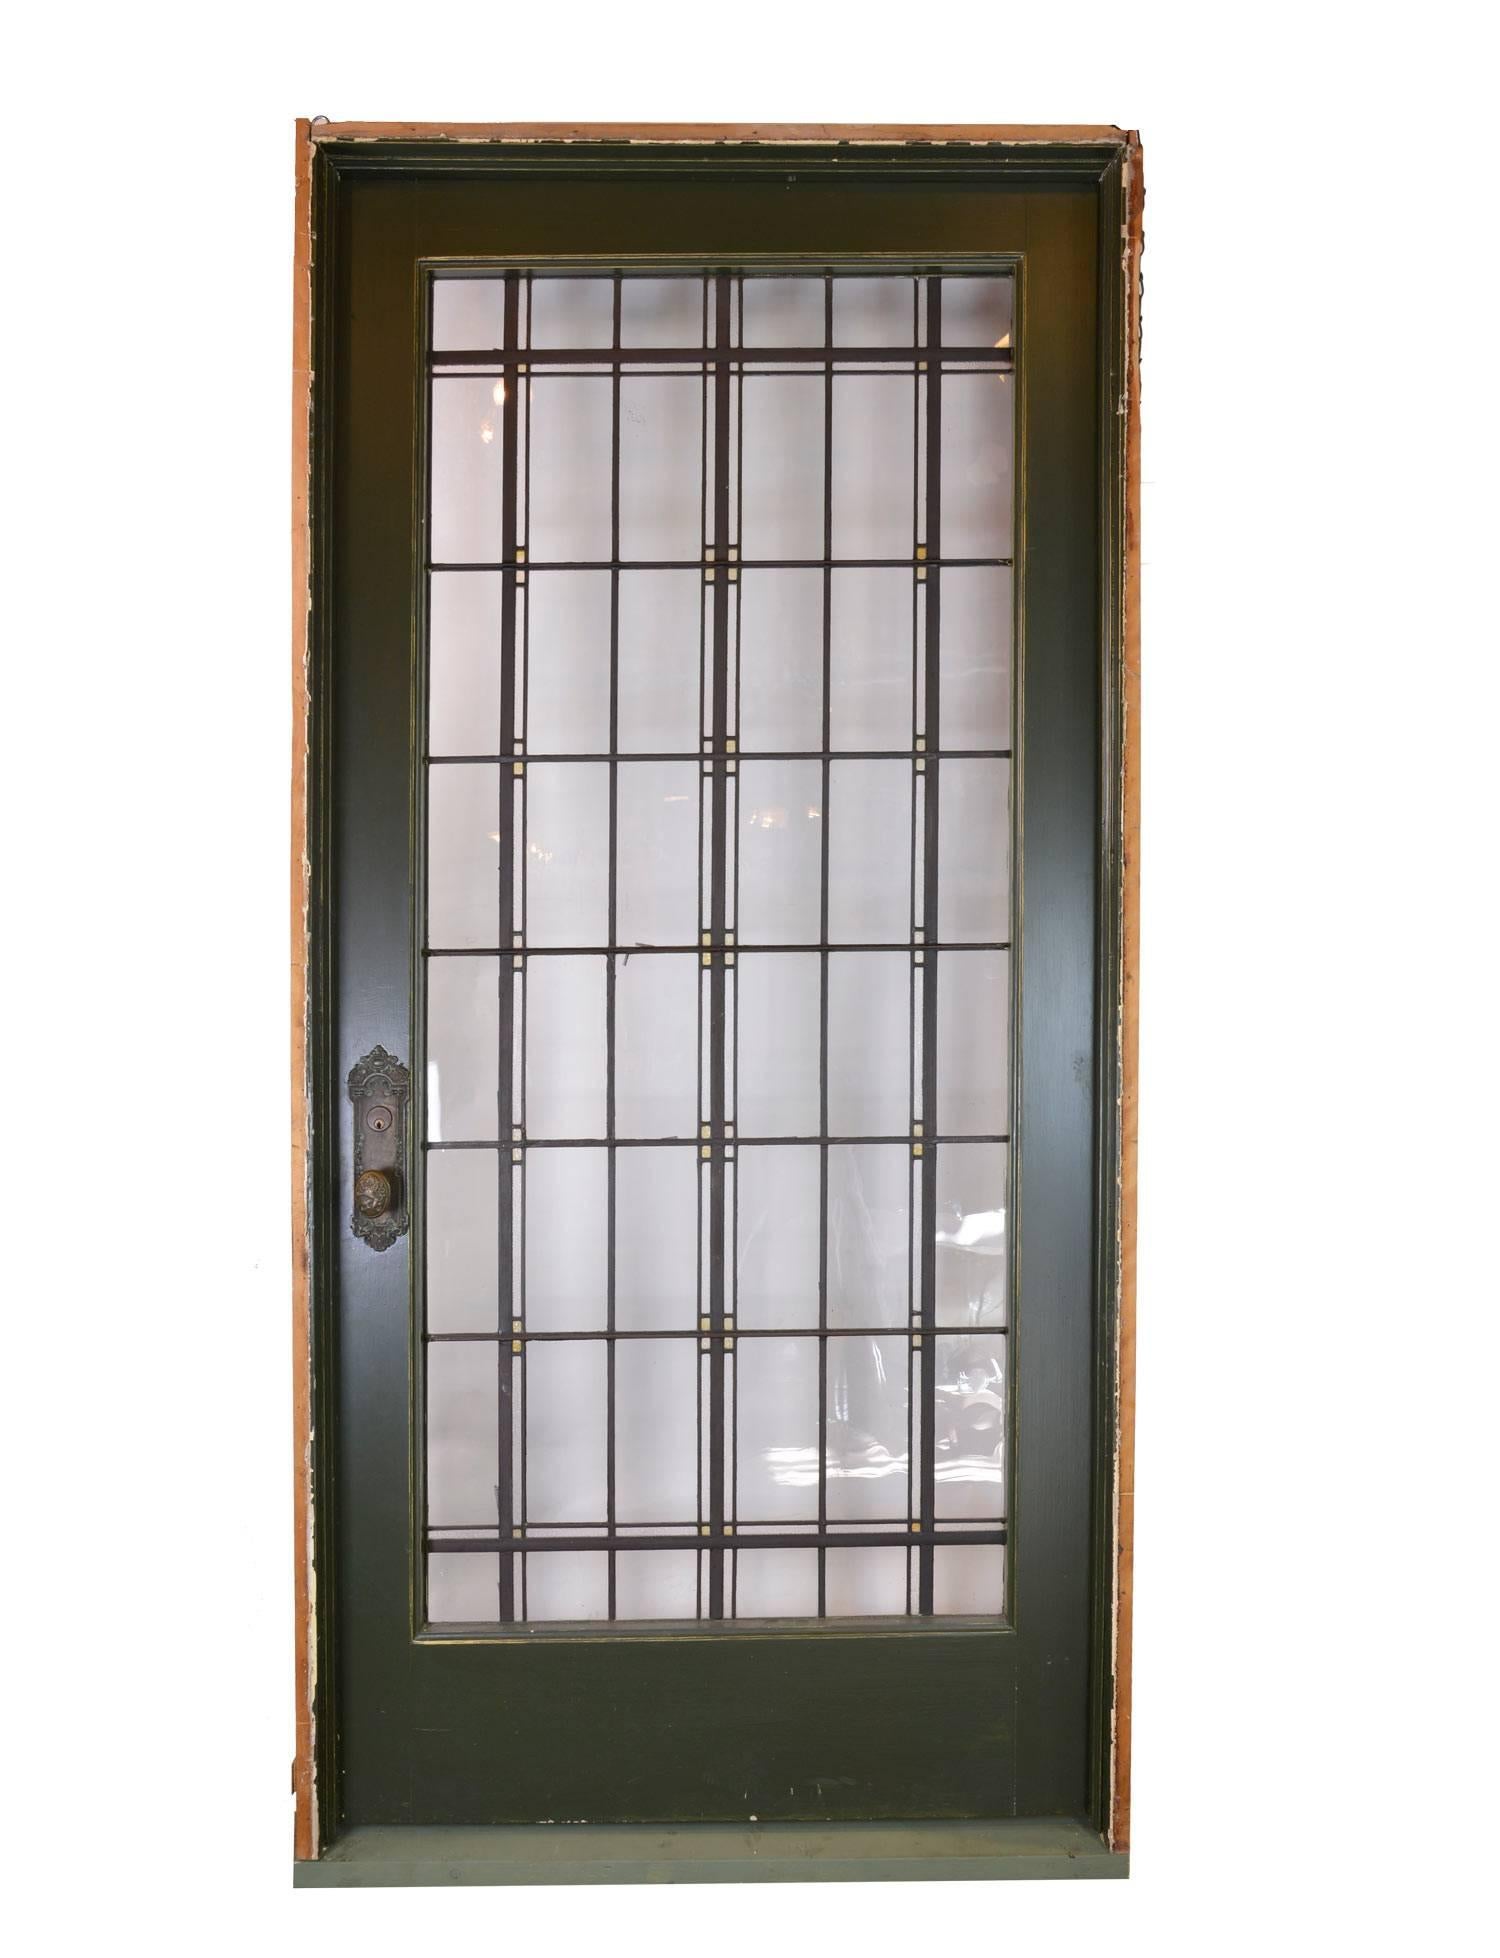 This regal glass door unit with stained glass details was recovered from a sizable Midwest home in a historic district. The door is painted a dark forest green over oak, and the glass is in pristine condition. Included is the original jamb and a